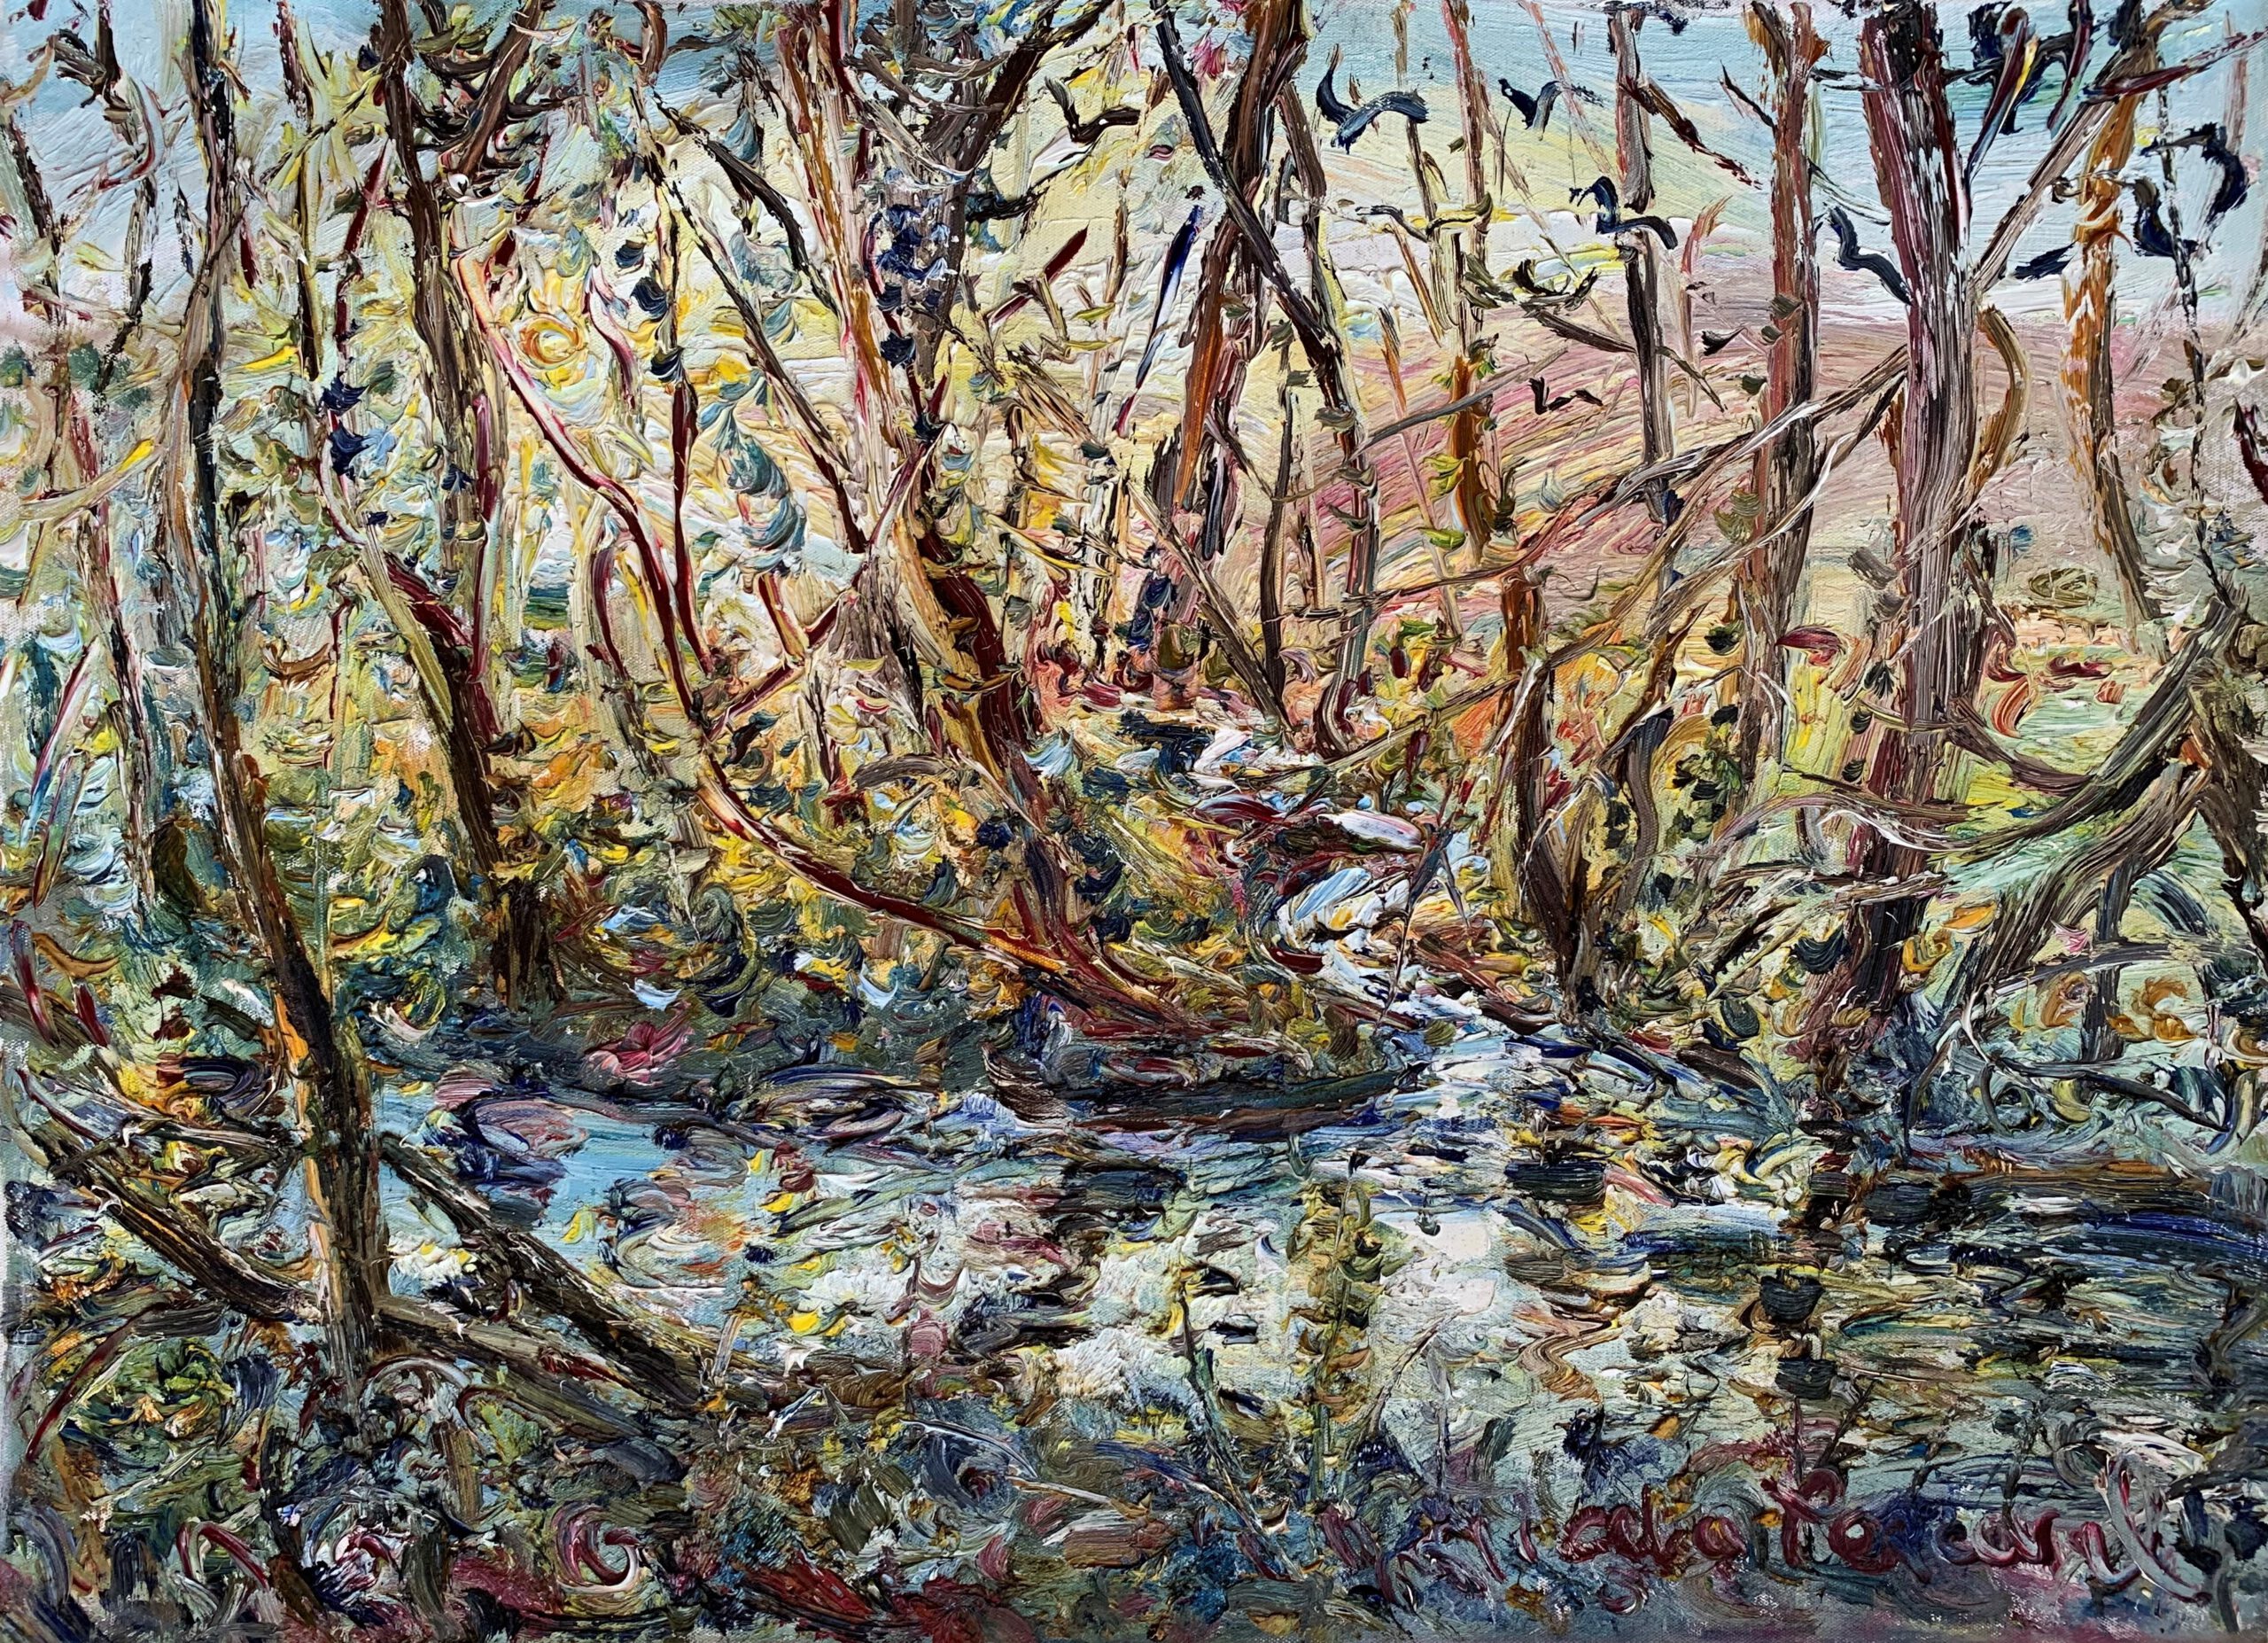 Perceval_Rooks Coming in to Roost at Sunset by the Hindwell Brook- oil on canvas-56 x 76cm-master